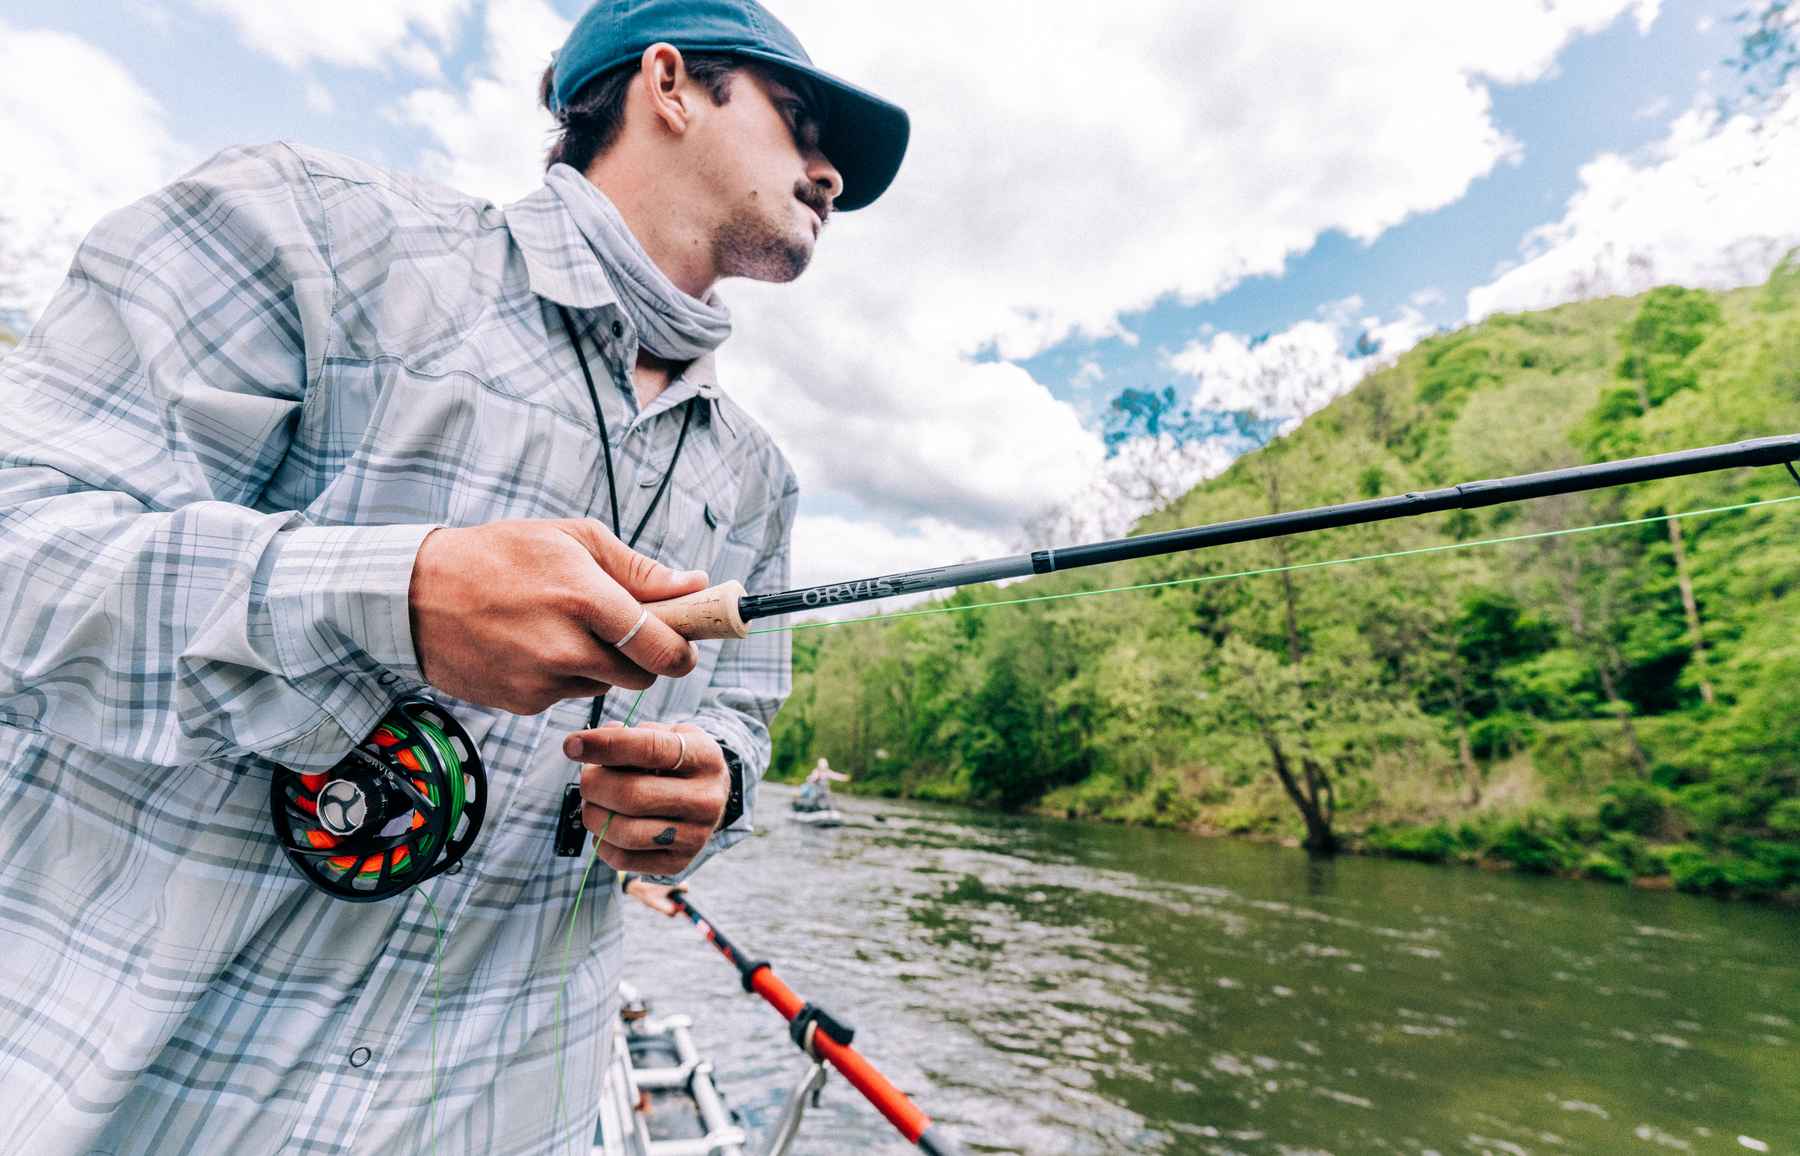 Review: Orvis Helios 3D Blackout 9' 5 5-weight fly rod